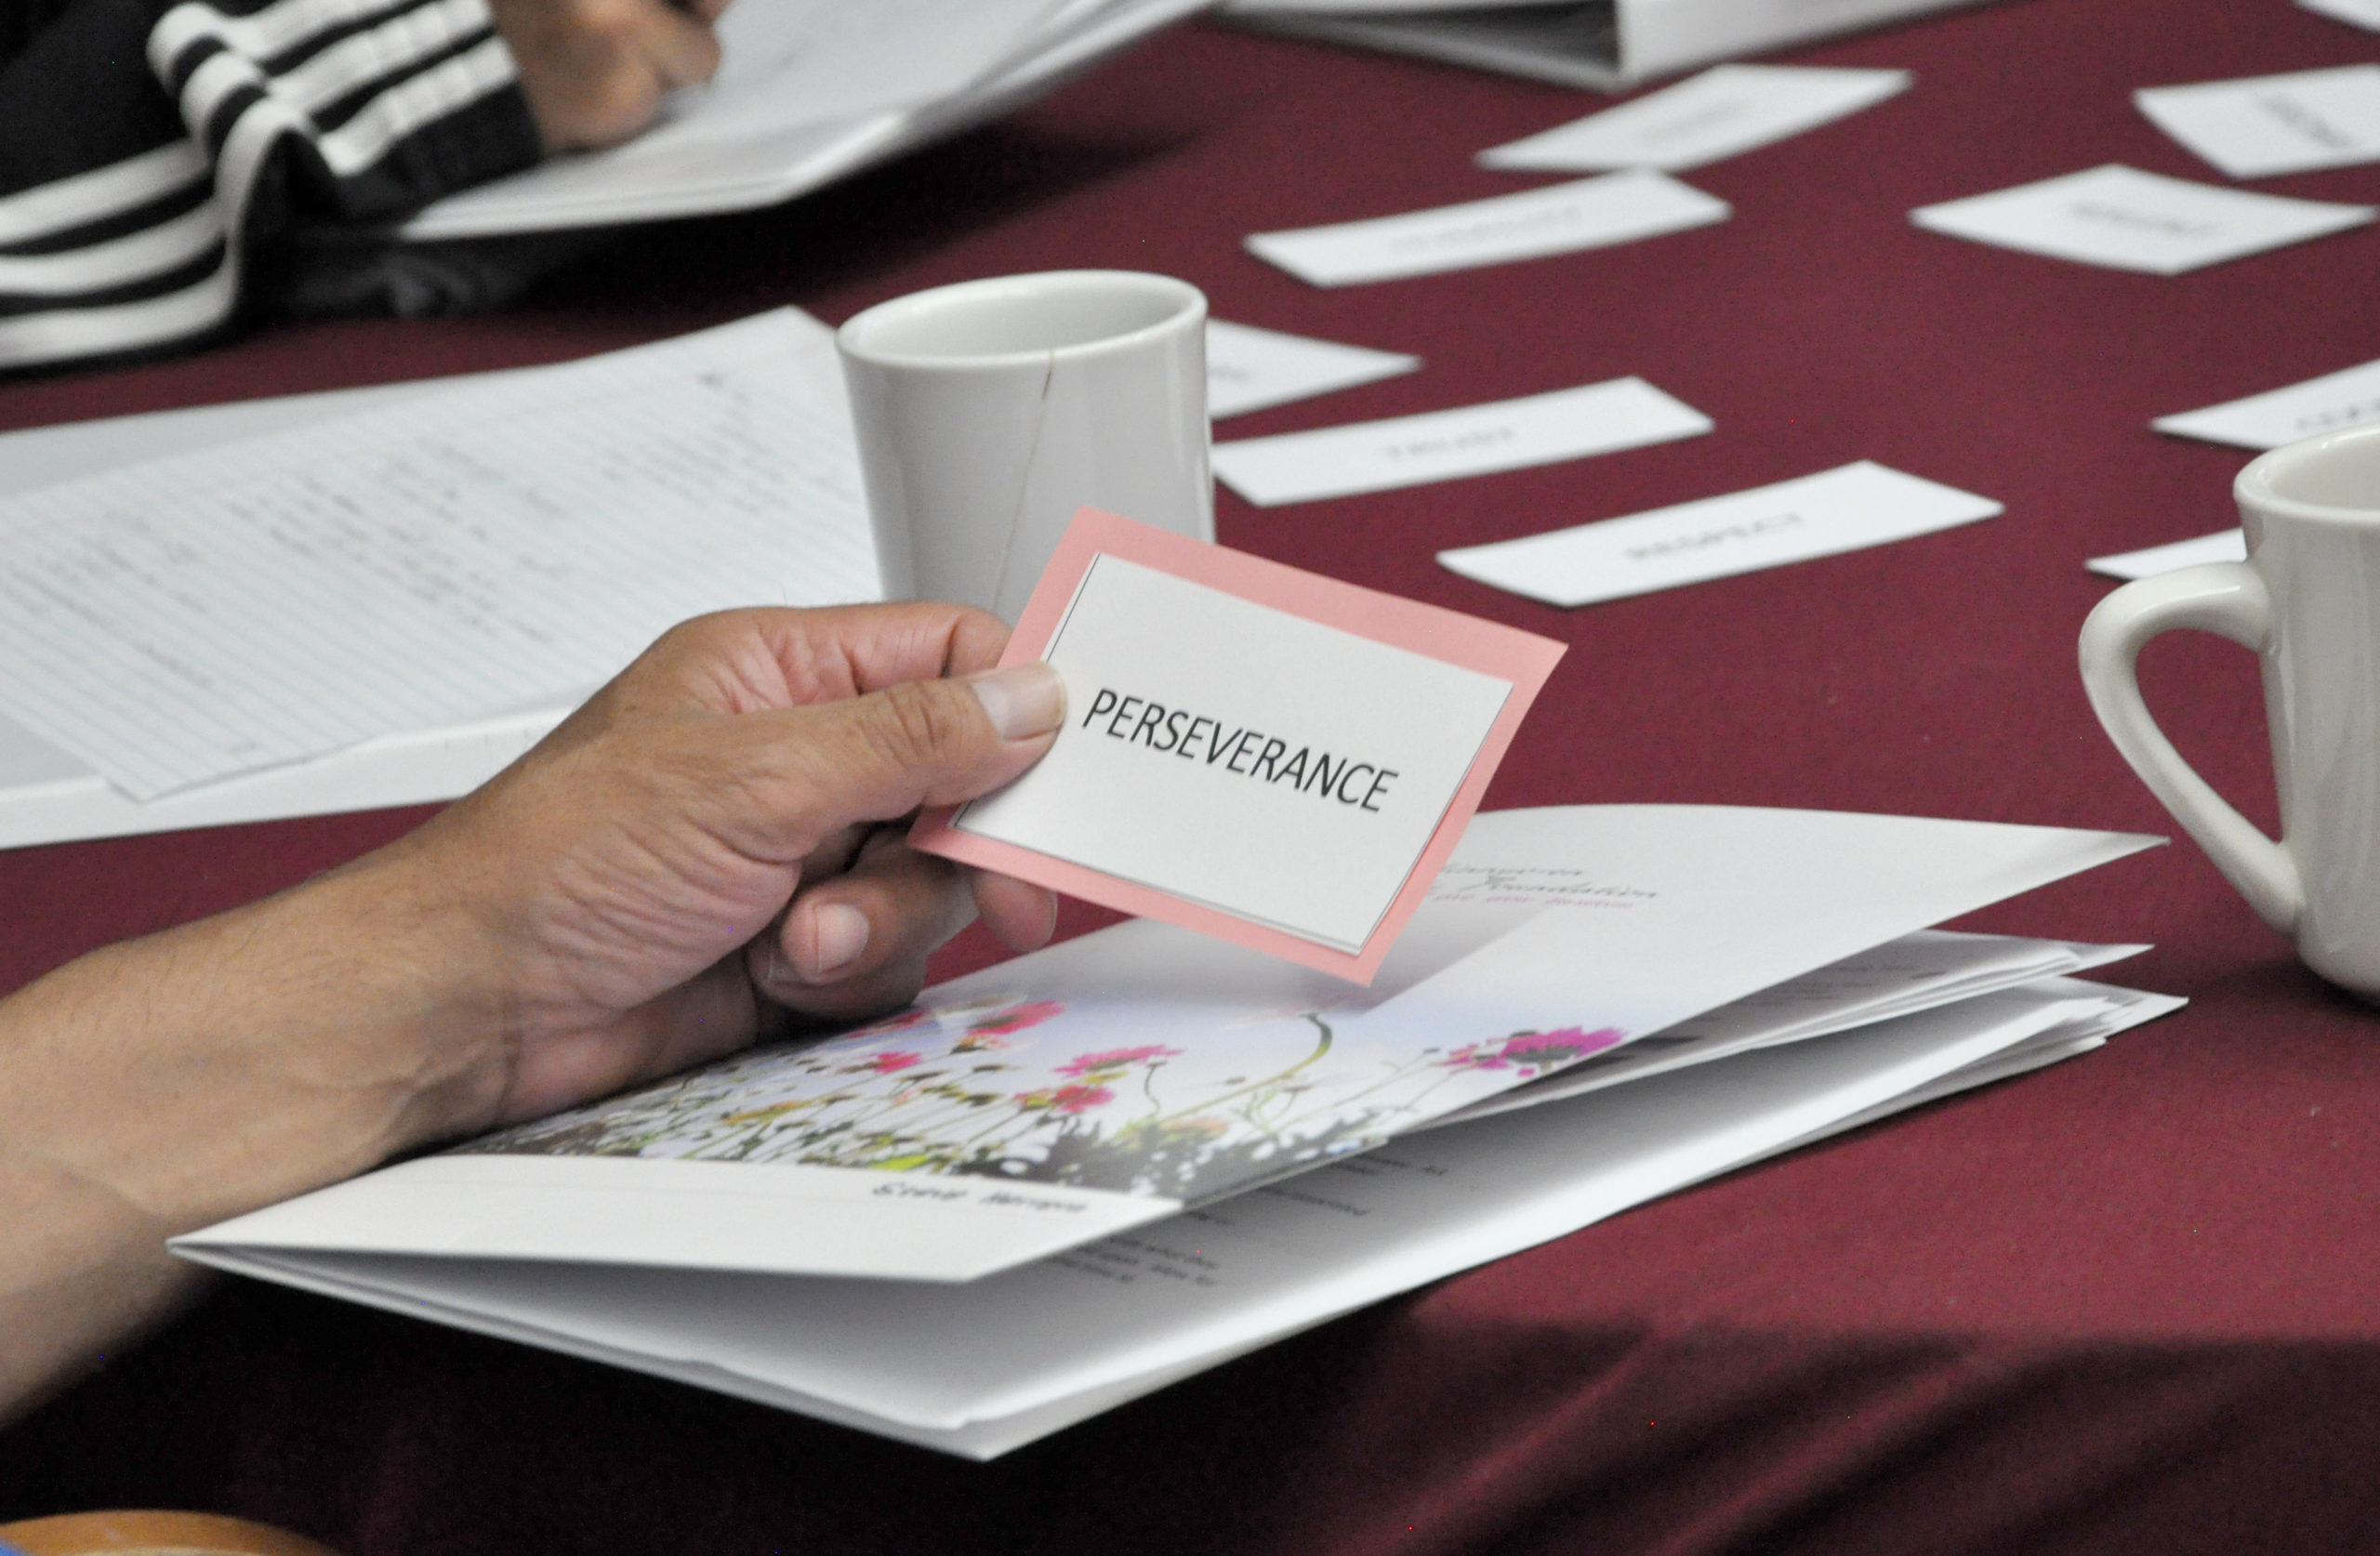 Hand holding a card that reads "Perseverance"